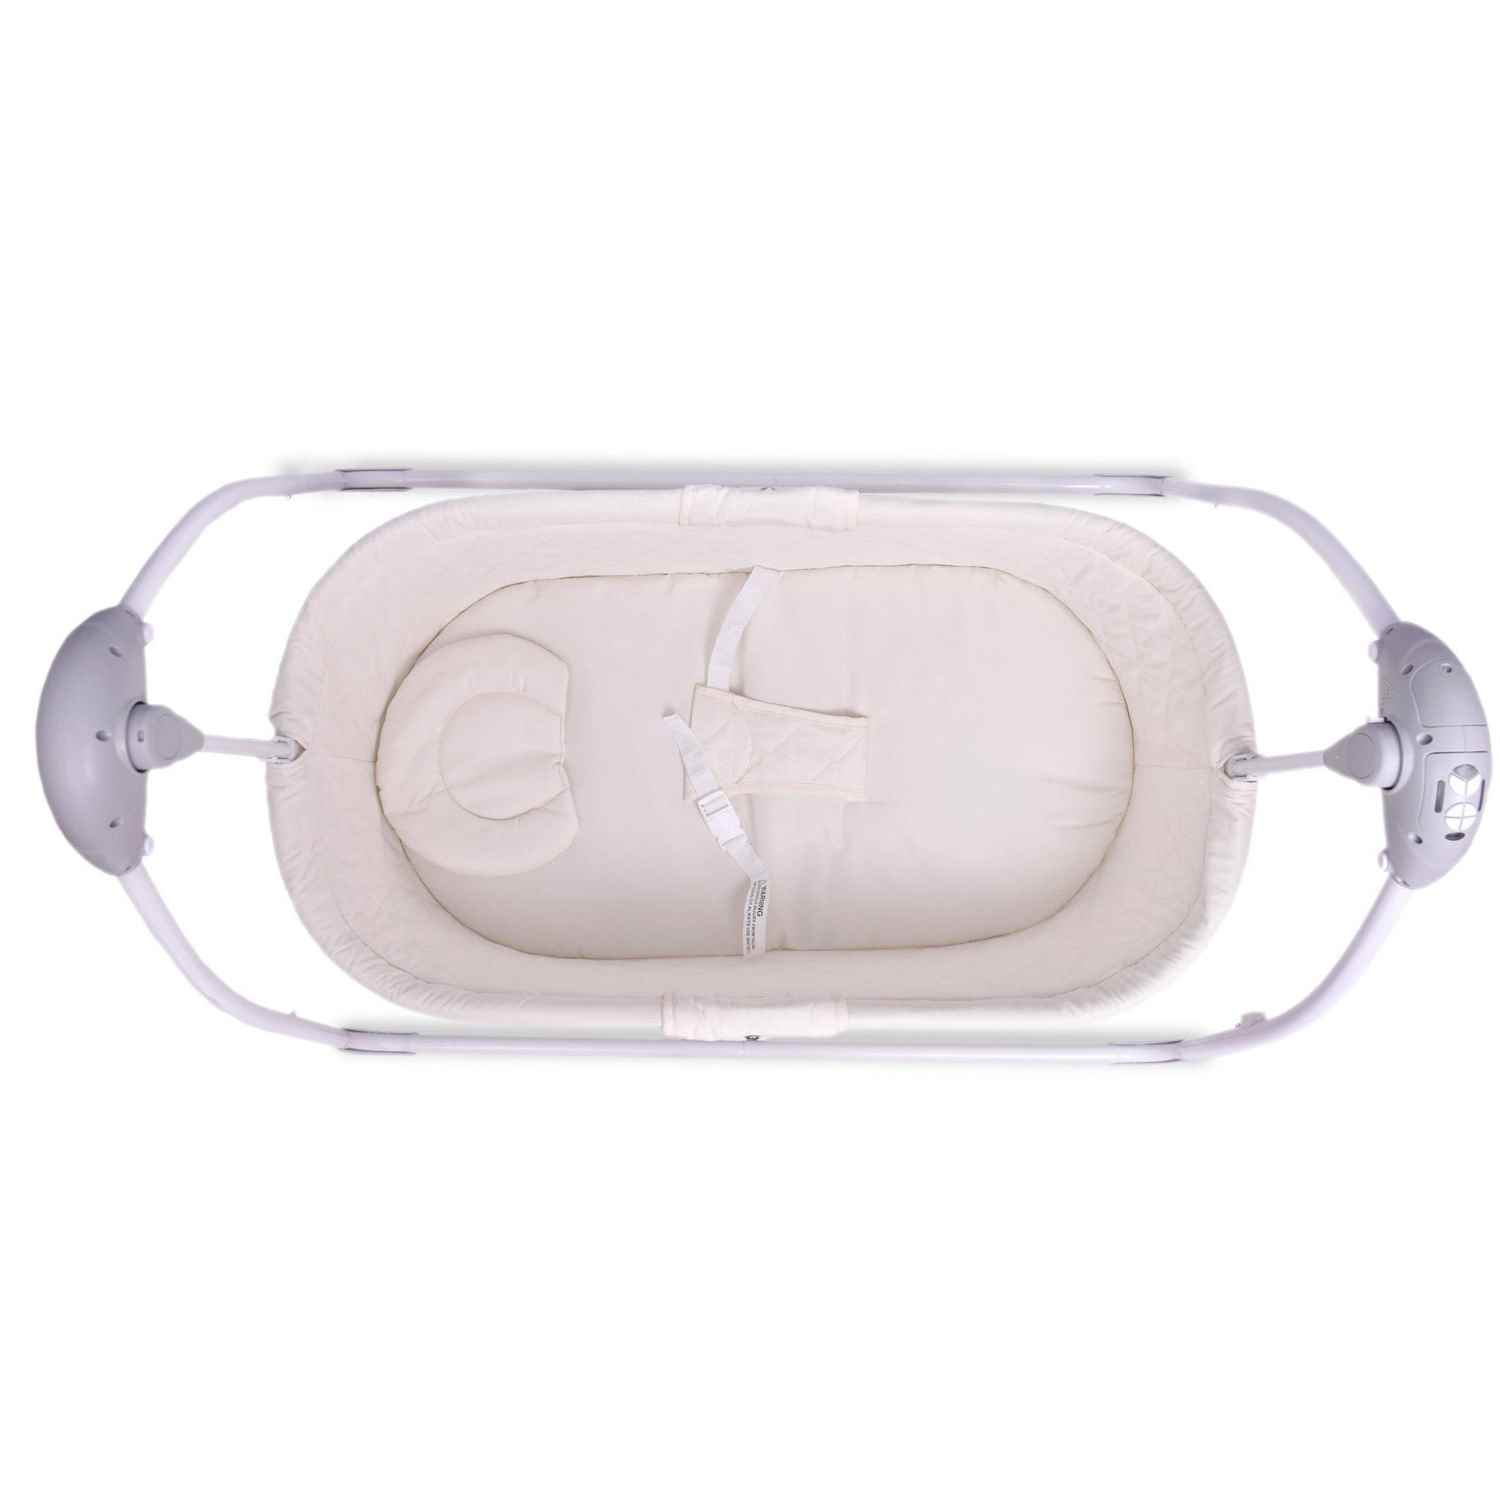 R FOR RABBIT Lullabies Baby Cradle with Remote Control & Mosquito Net - Cream